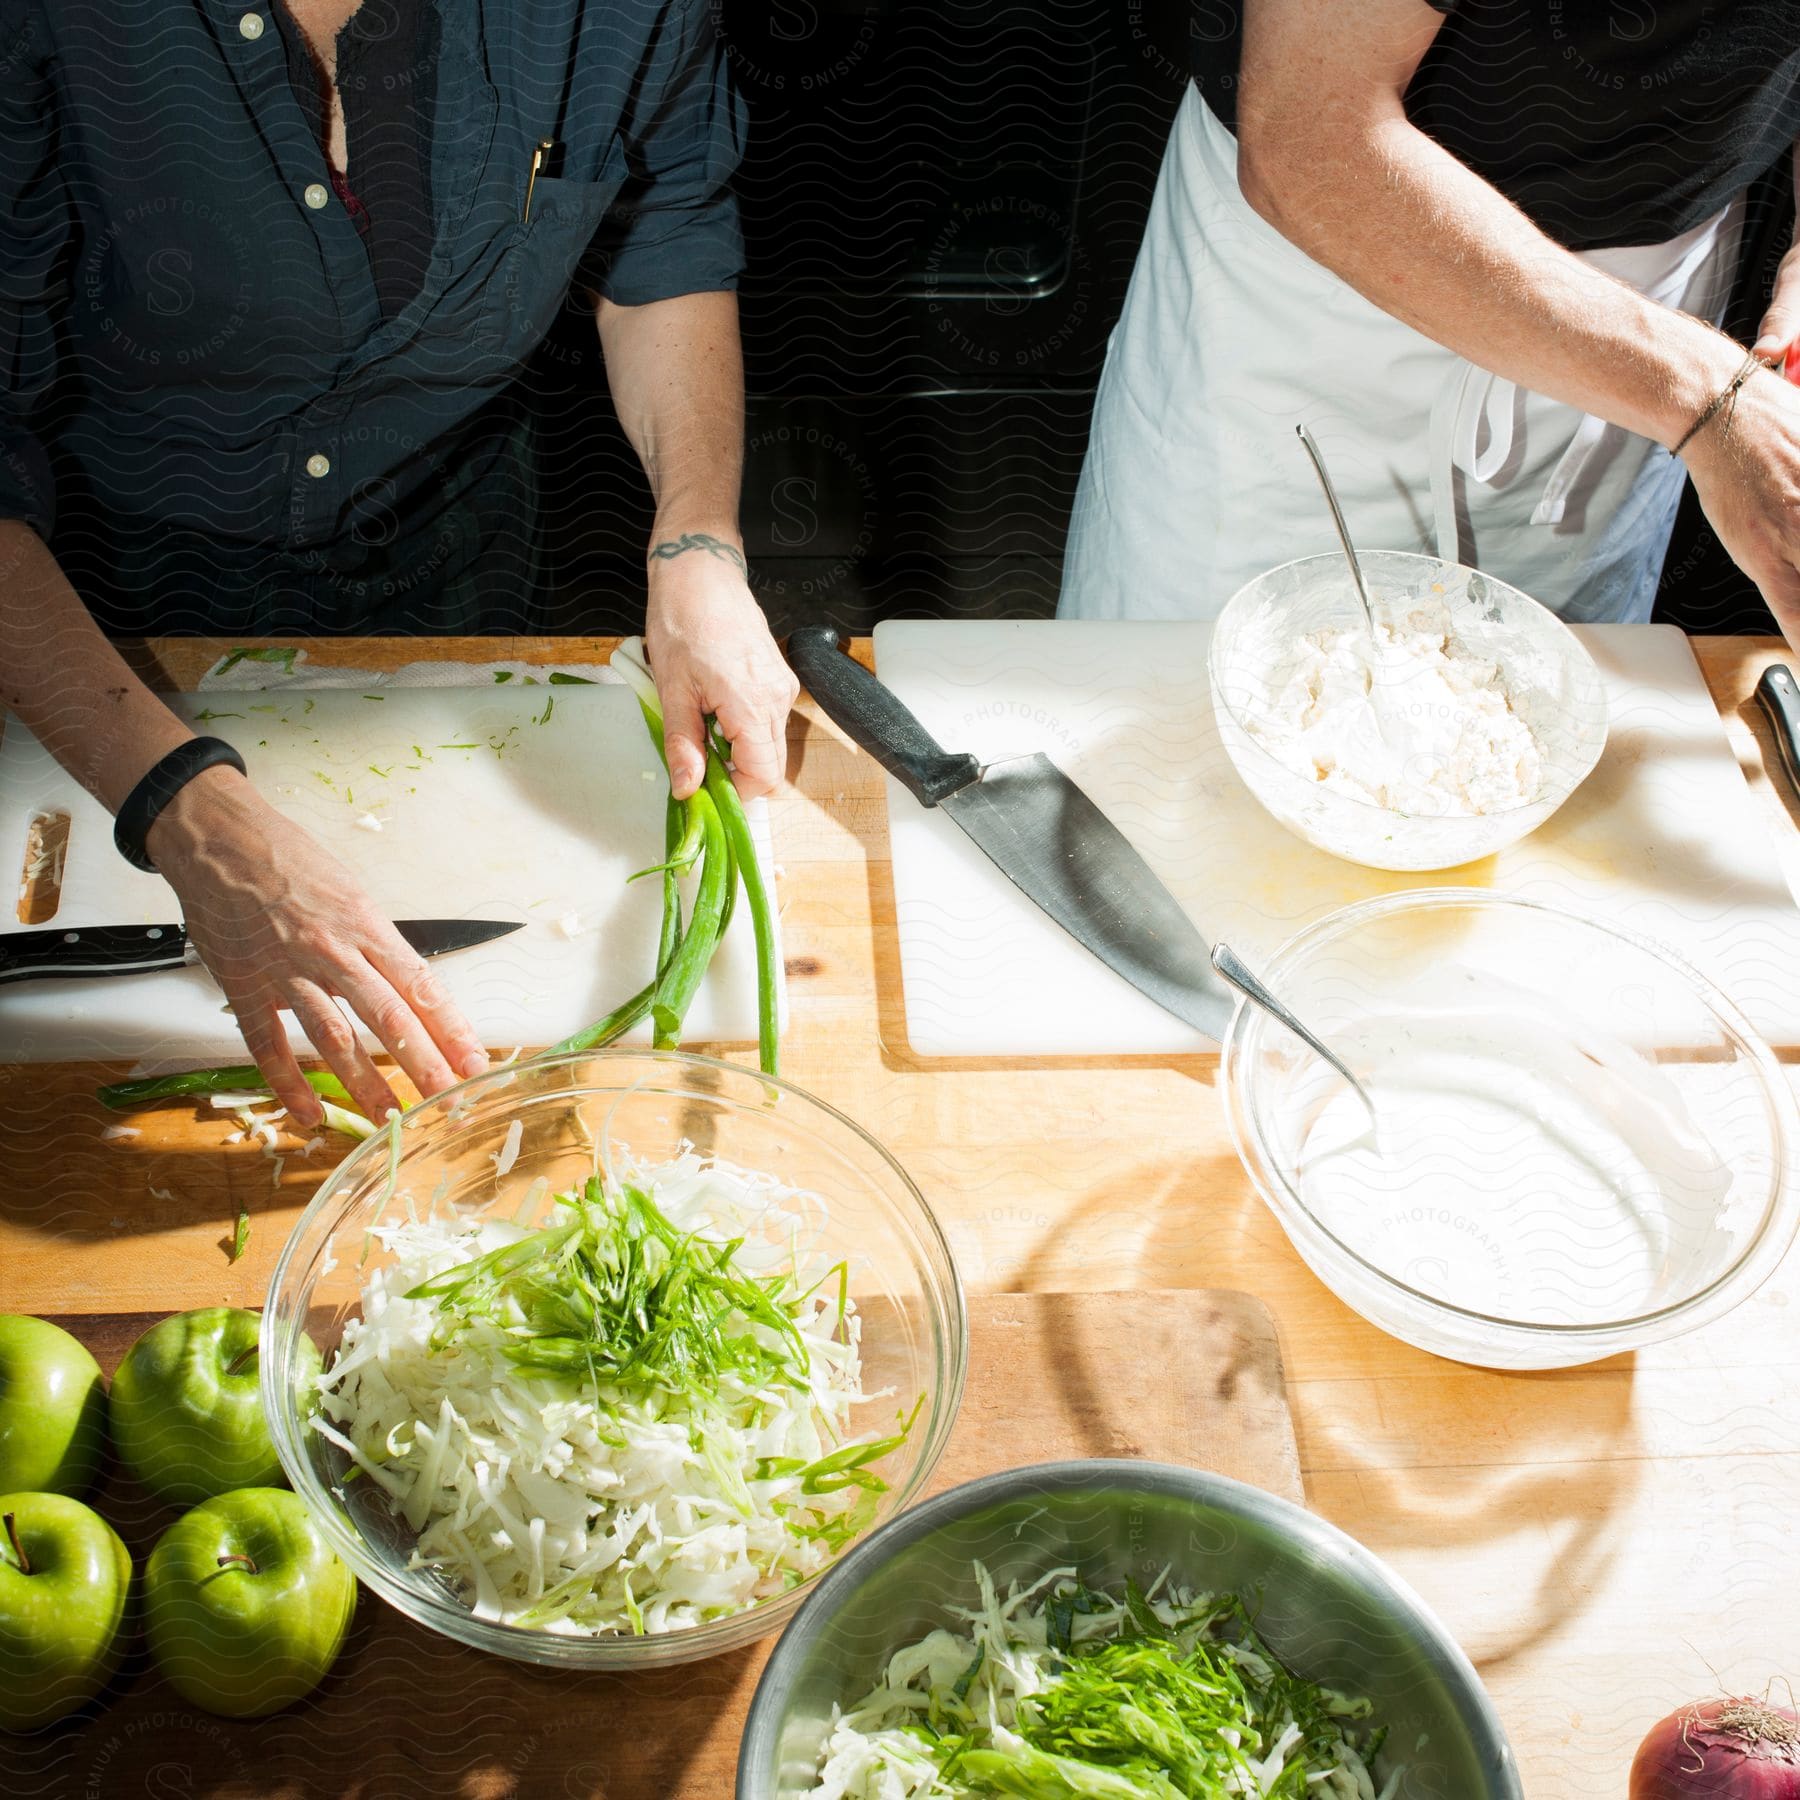 Two chefs preparing food at a counter with bowls of vegetables and fruits